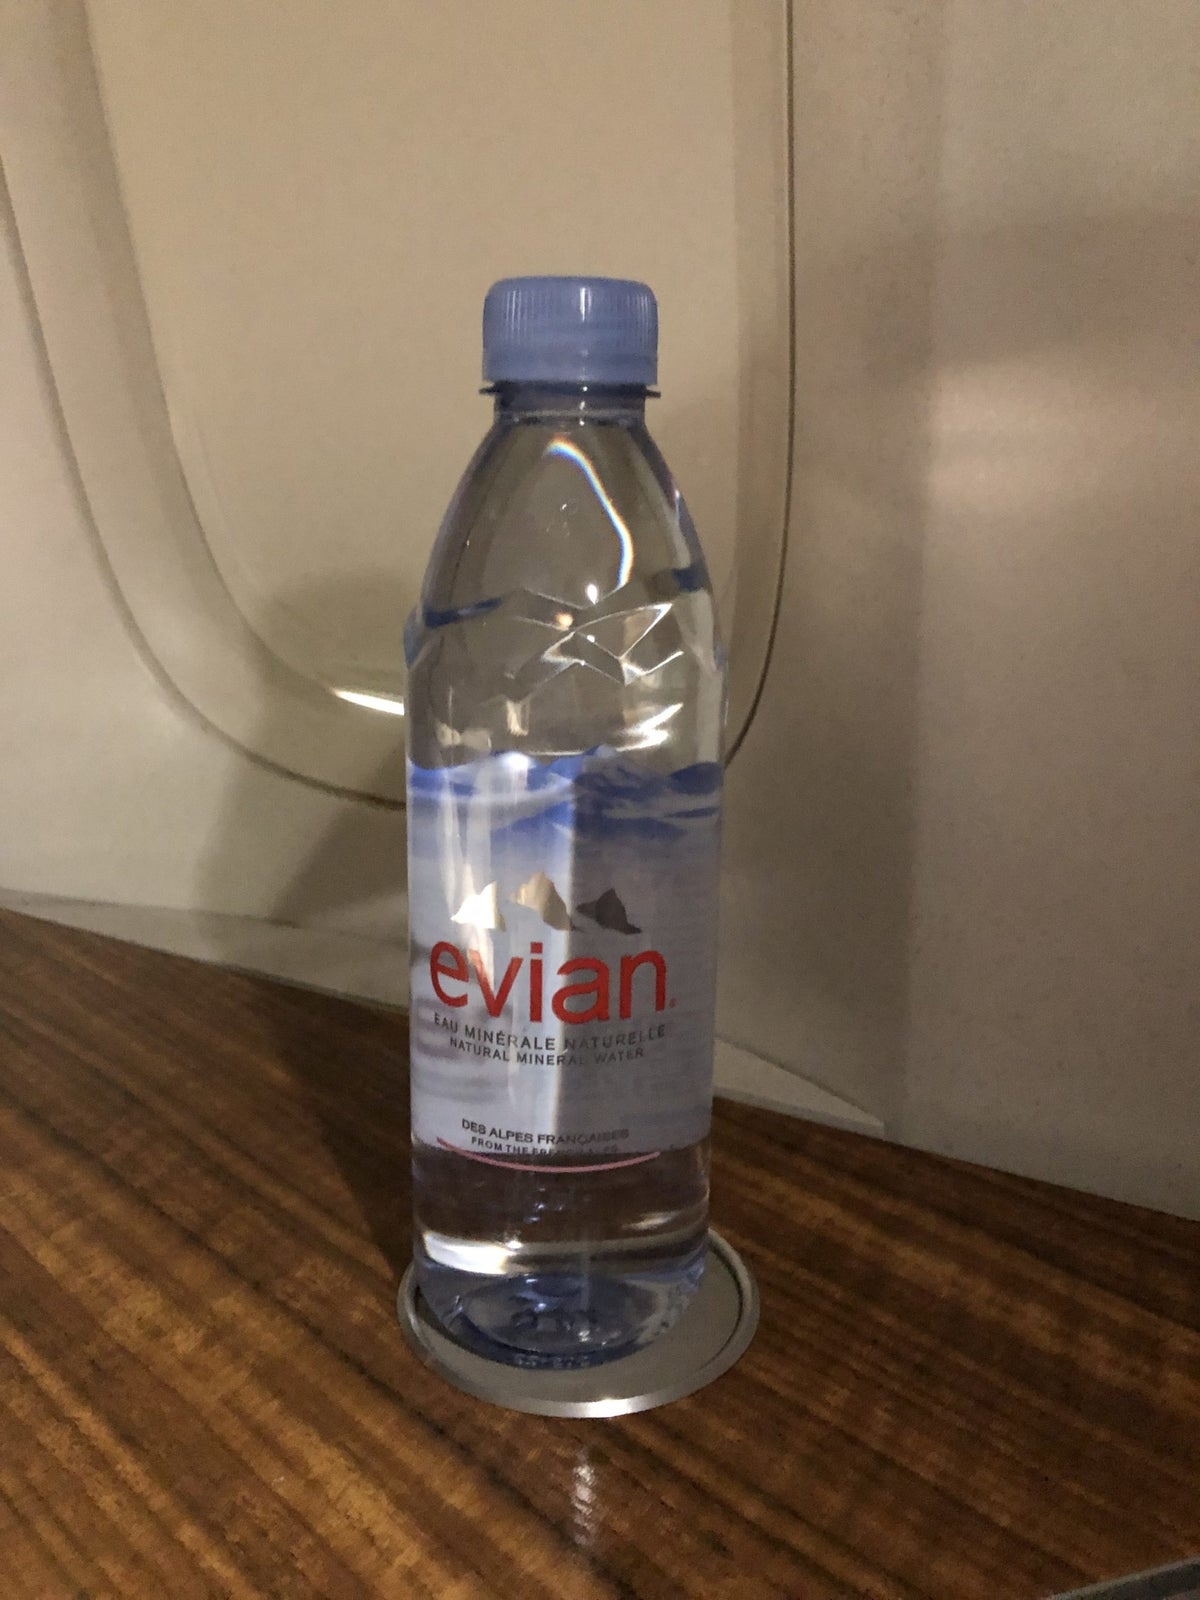 Cathay Pacific 777 first class Evian water bottle